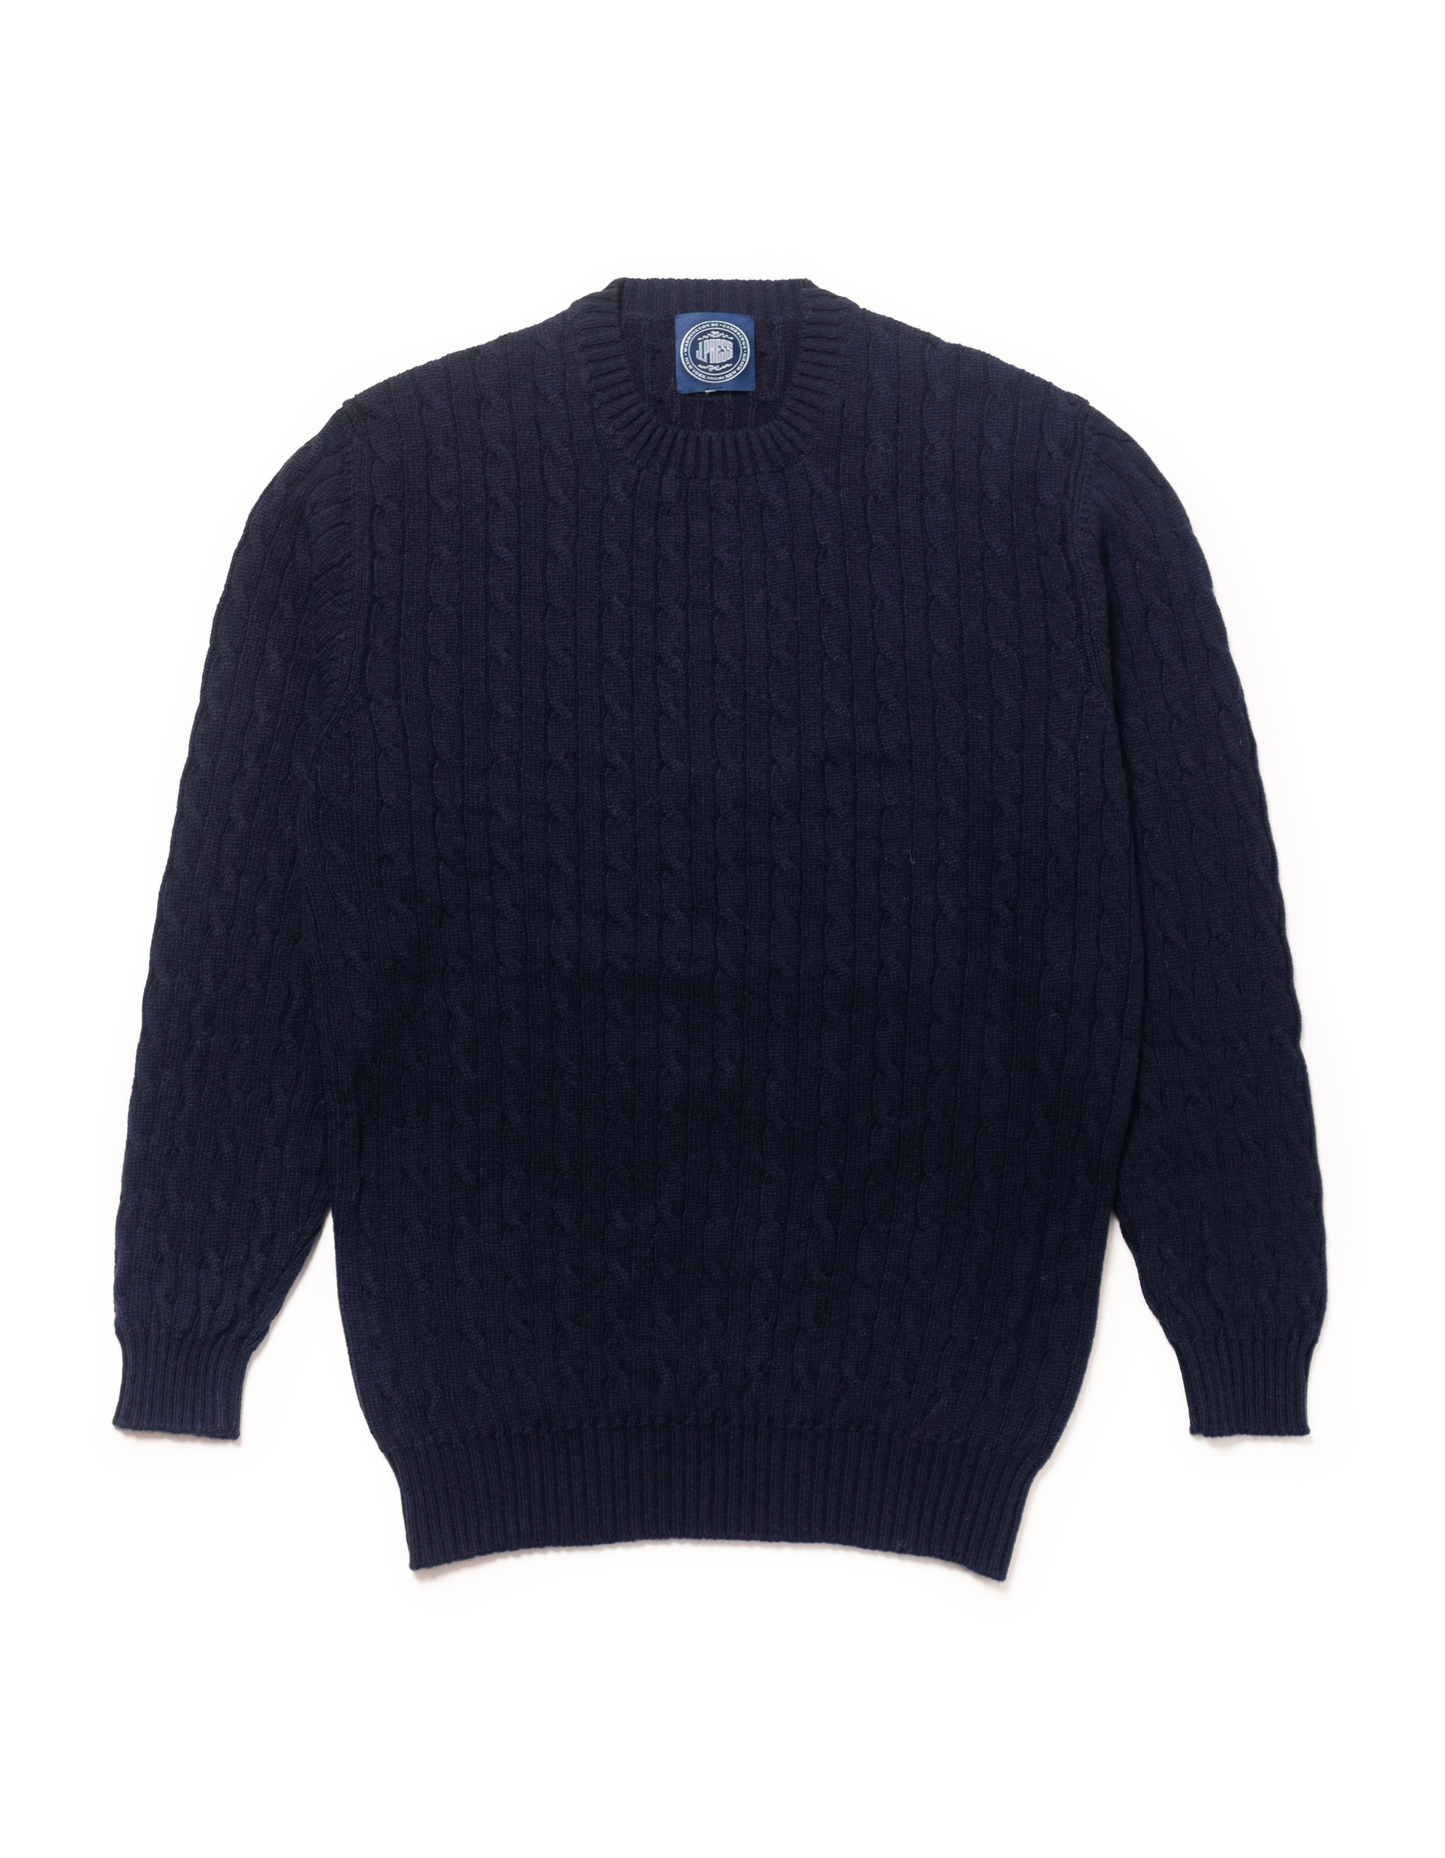 NAVY CASHMERE CABLE